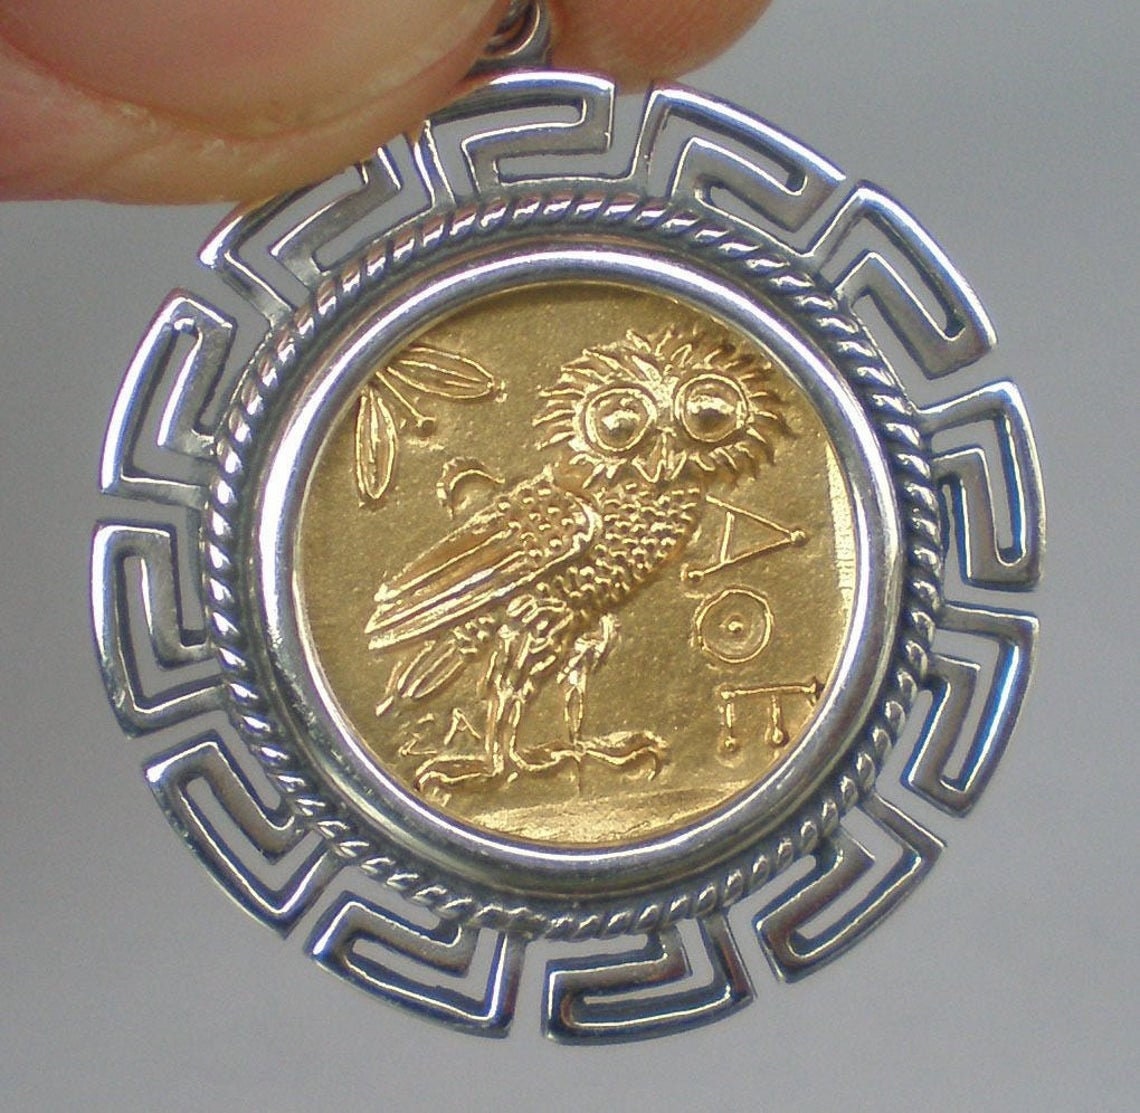 Owl of Wisdom - Greek Roman Goddess Athena Minerva - Meander - Gold Plated Coin Pendant - 925 Sterling Silver